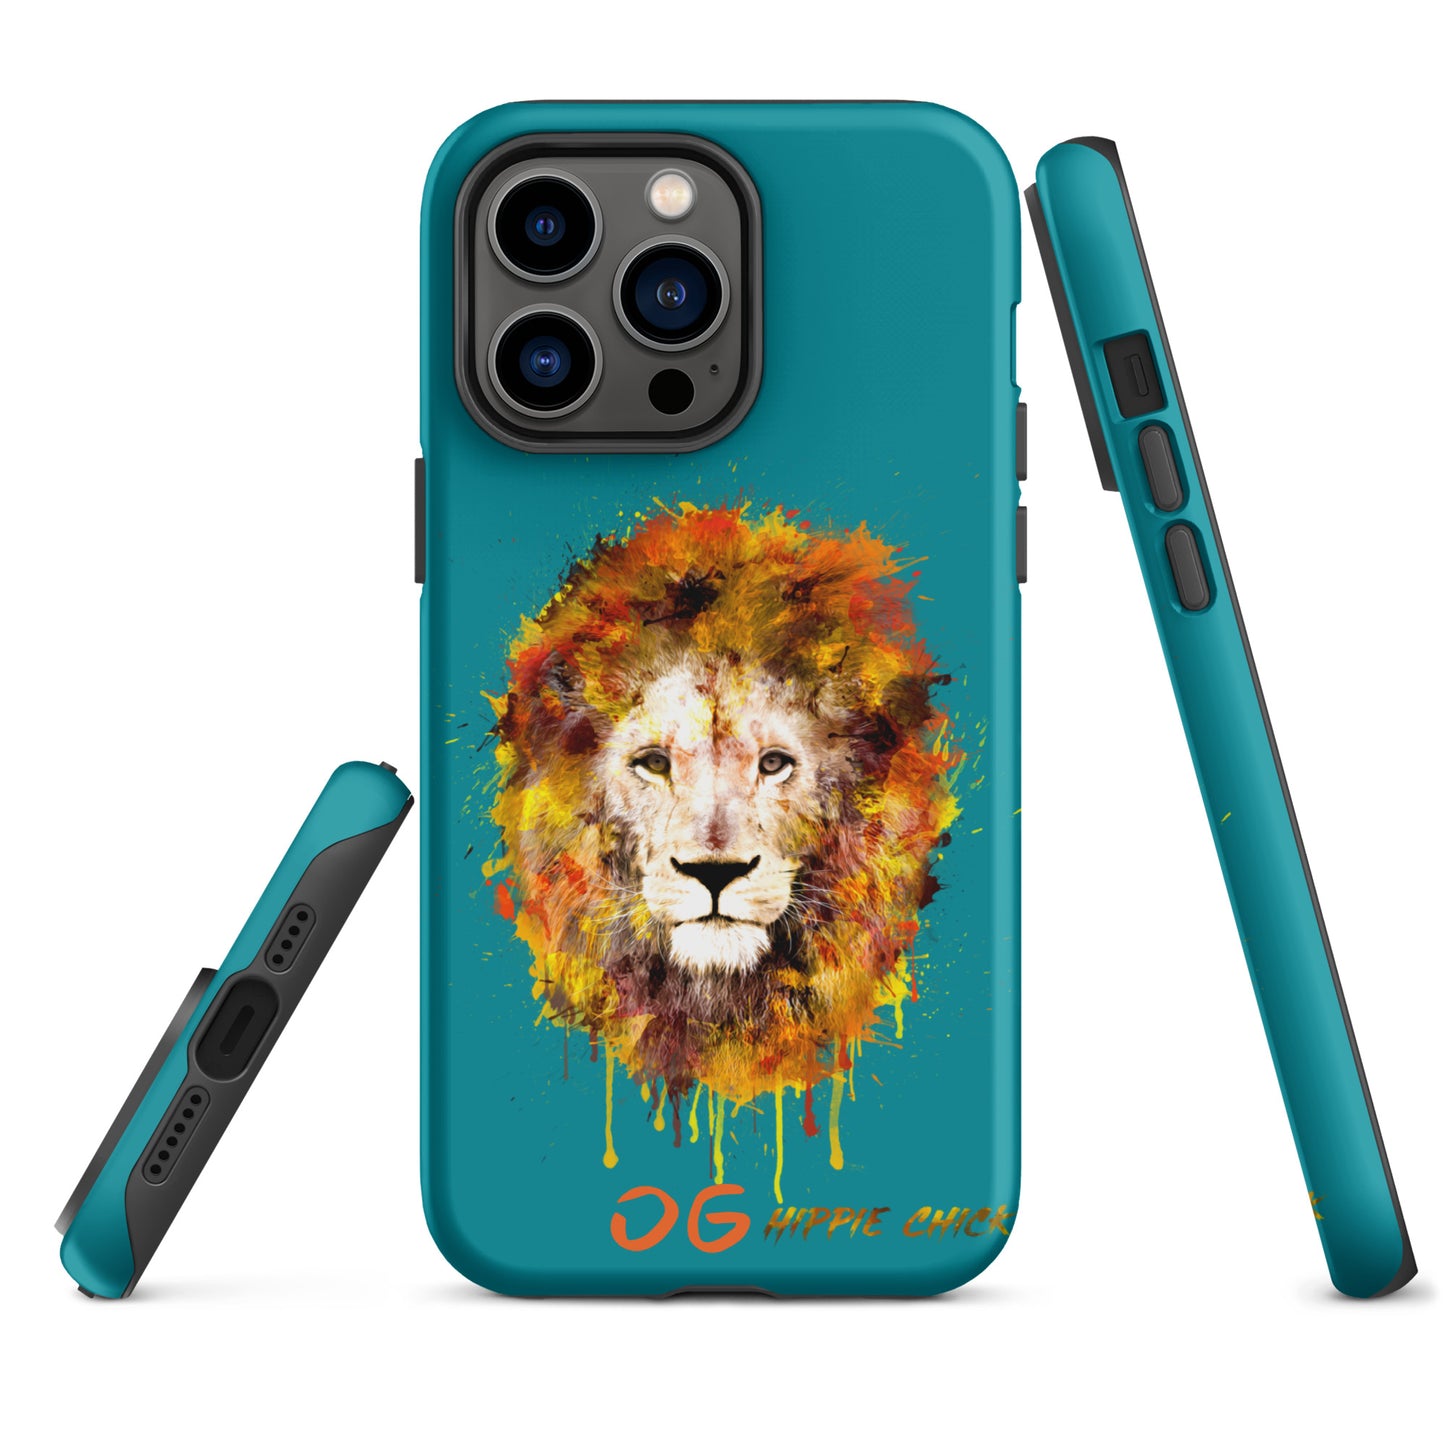 Teal iPhone Case